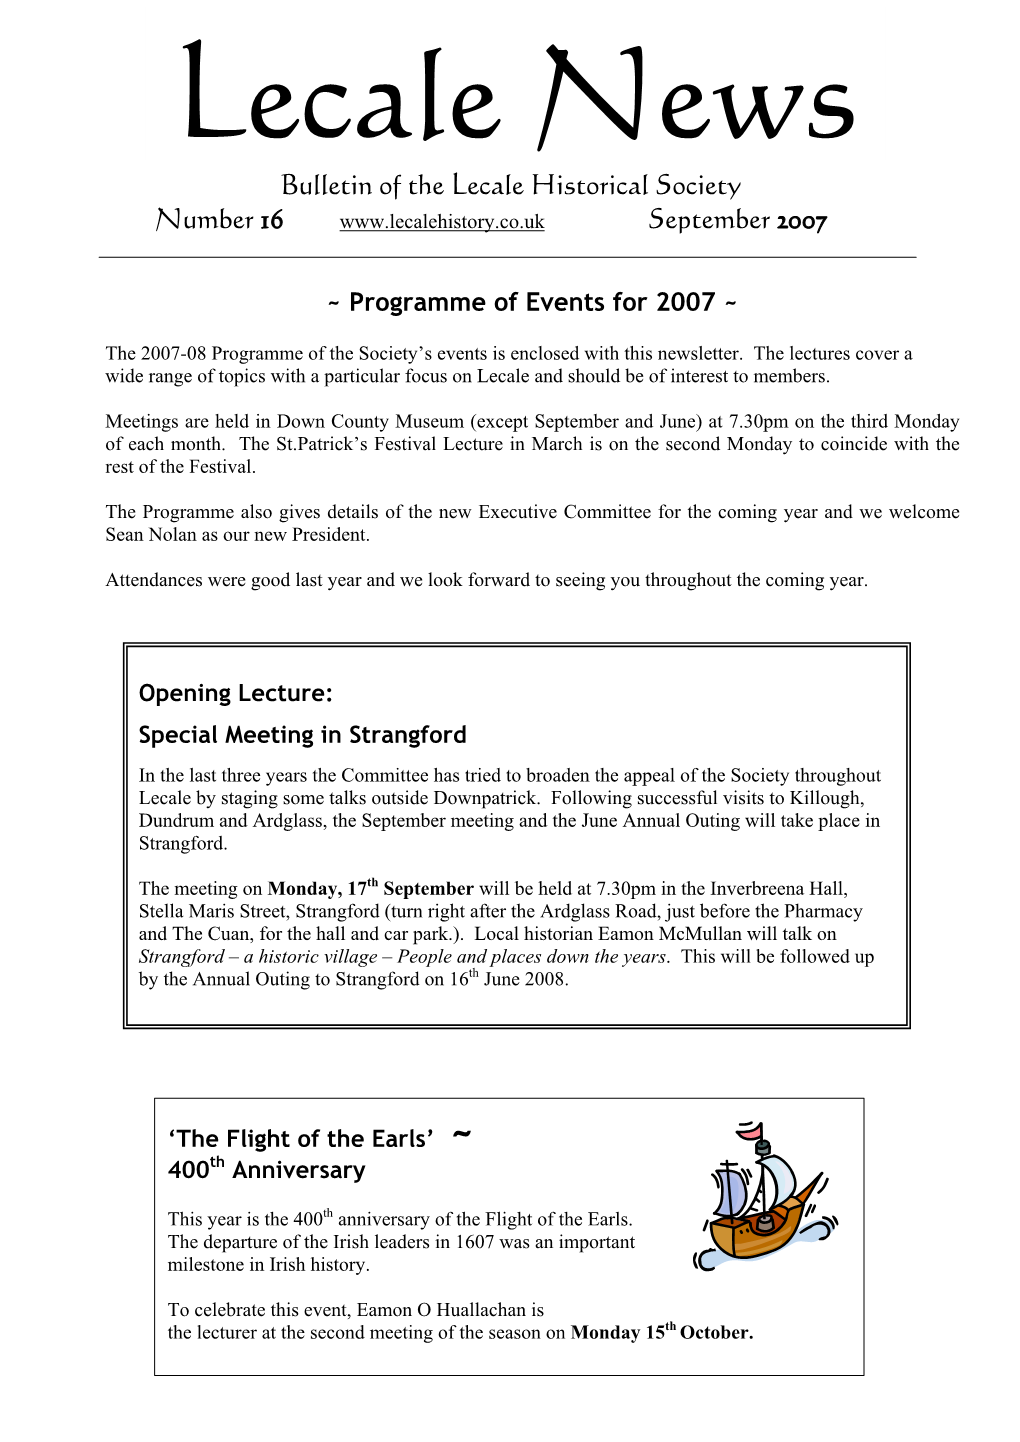 Bulletin of the Lecale Historical Society Number 16 September 2007